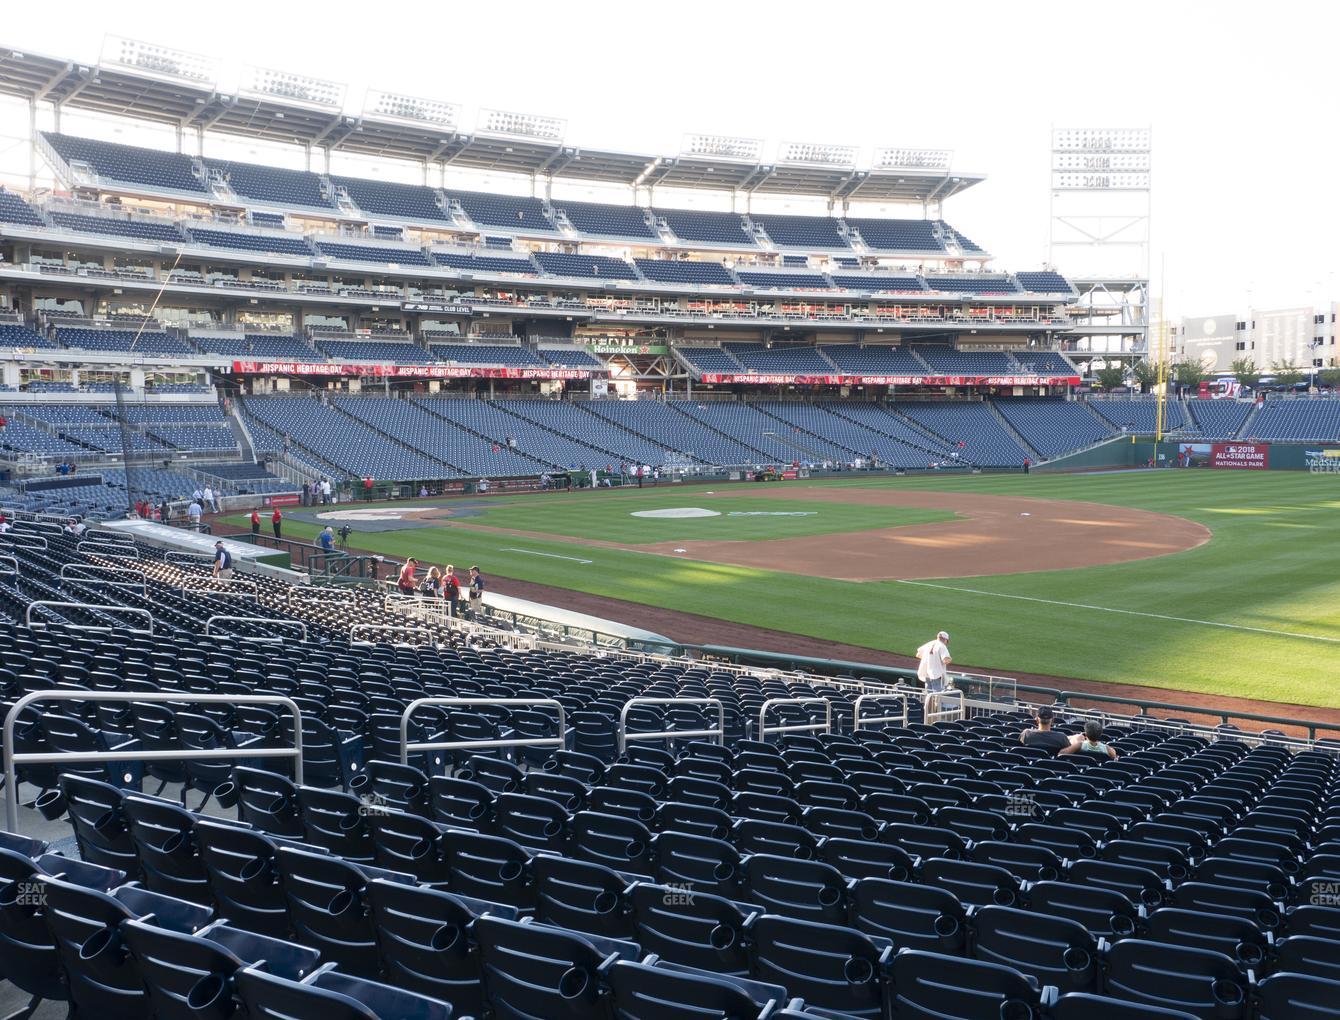 Washington Nationals Park Seating Chart With Rows